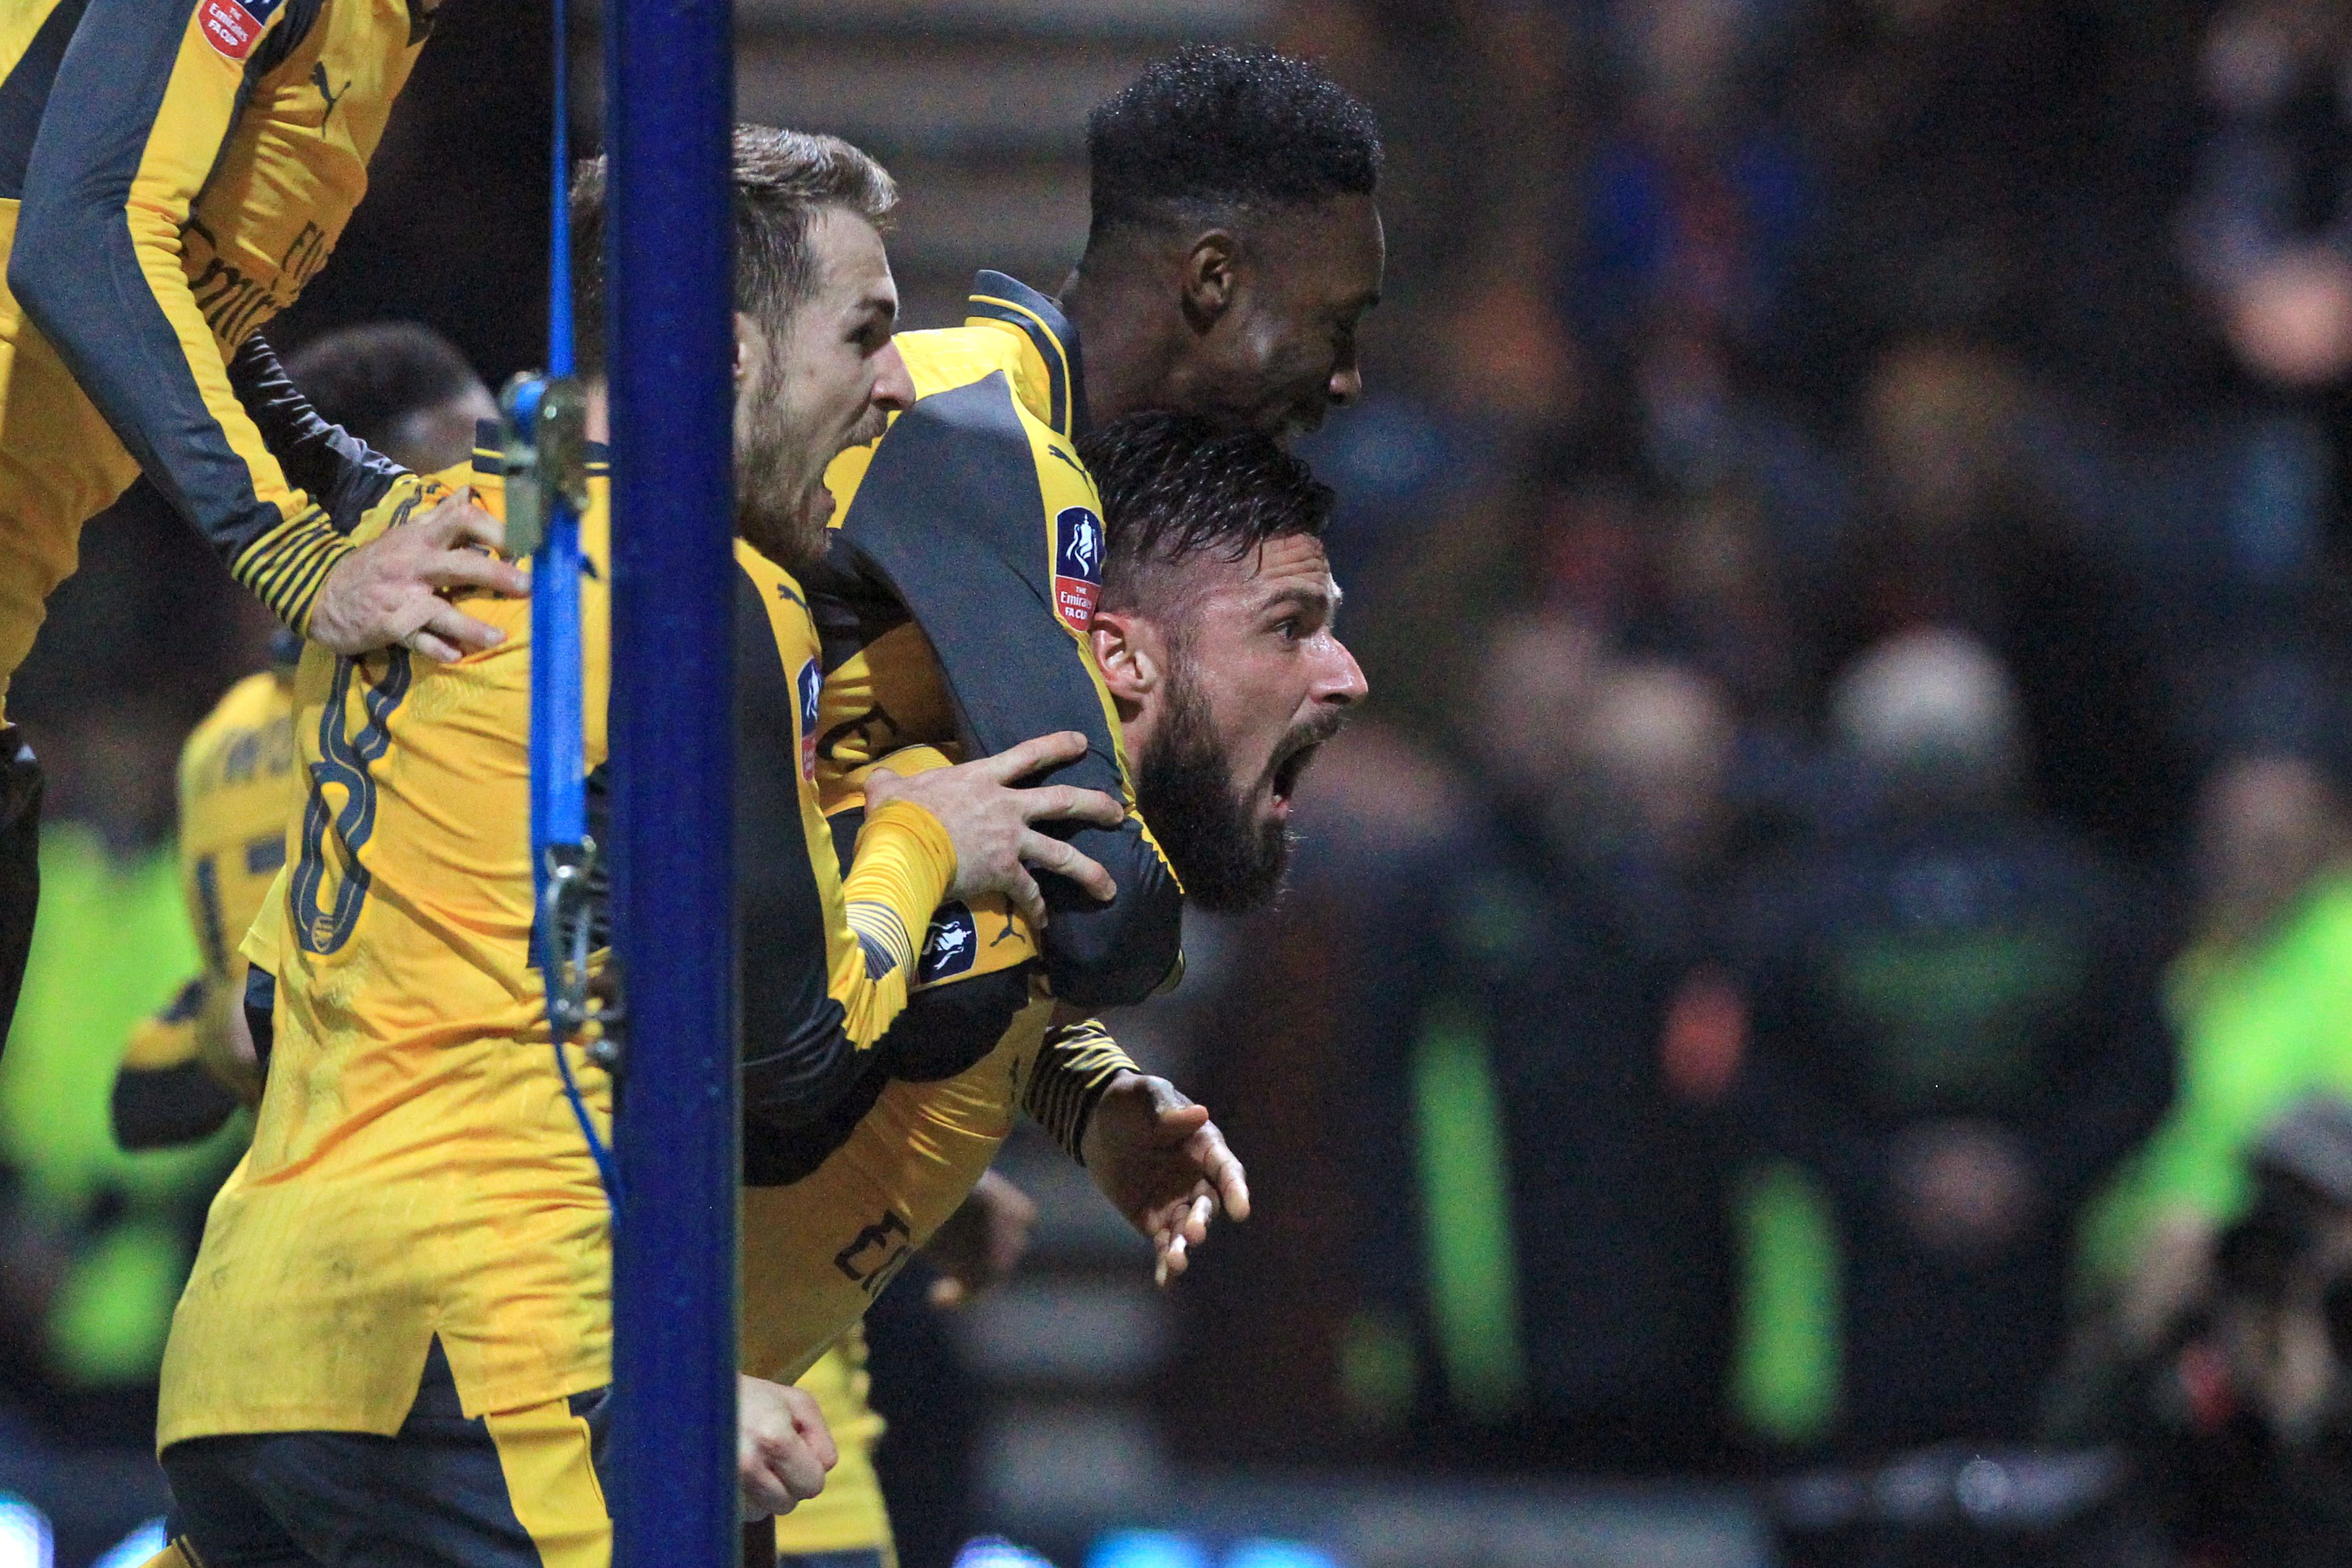 Arsenal's French striker Olivier Giroud (R) celebrates with Arsenal's English striker Danny Welbeck and Arsenal's Welsh midfielder Aaron Ramsey (L) after scoring their second goal during the English FA Cup third round football match between Preston North End and Arsenal at Deepdale in north west England on January 7, 2017.
Arsenal won the game 2-1. / AFP / Lindsey PARNABY / RESTRICTED TO EDITORIAL USE. No use with unauthorized audio, video, data, fixture lists, club/league logos or 'live' services. Online in-match use limited to 75 images, no video emulation. No use in betting, games or single club/league/player publications.  /         (Photo credit should read LINDSEY PARNABY/AFP/Getty Images)